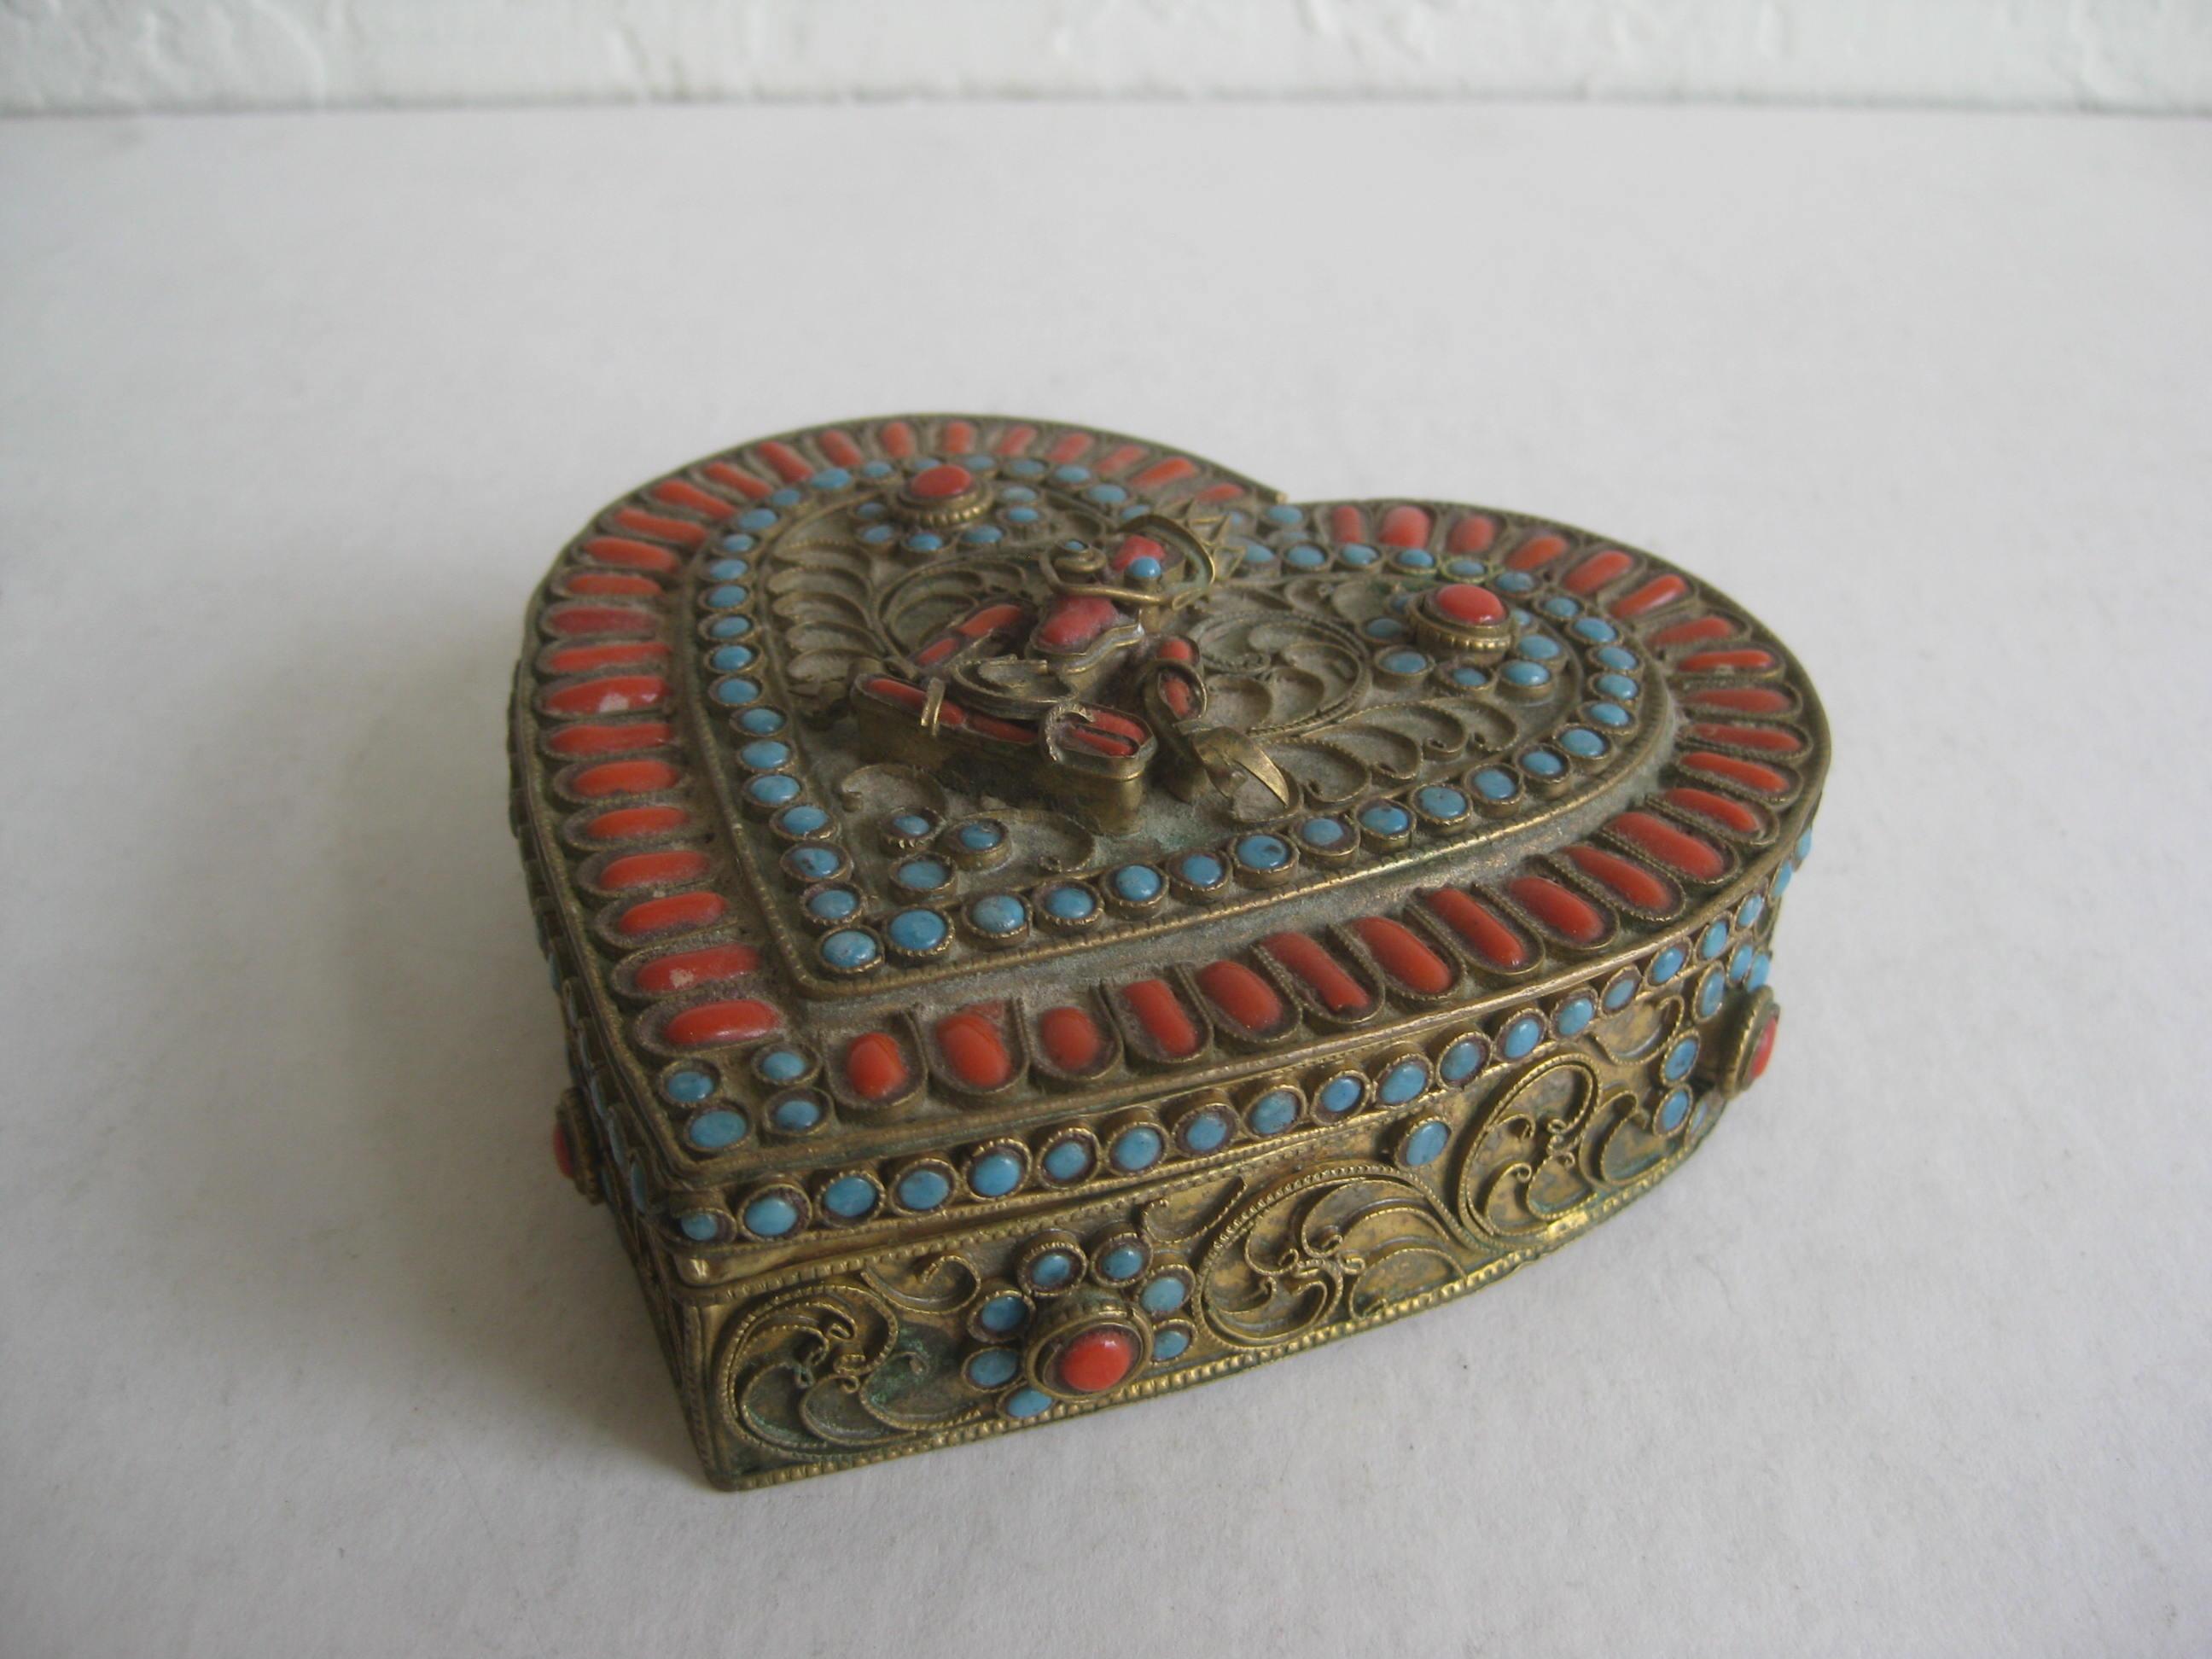 A beautiful Chinese-Tibetan brass heart shaped box with turquoise and coral glass inlay pieces. Great filigree design with a buddha figurine on the top. Has a wonderful patina. In good shape with age appropriate wear. Has no missing pieces. Opens